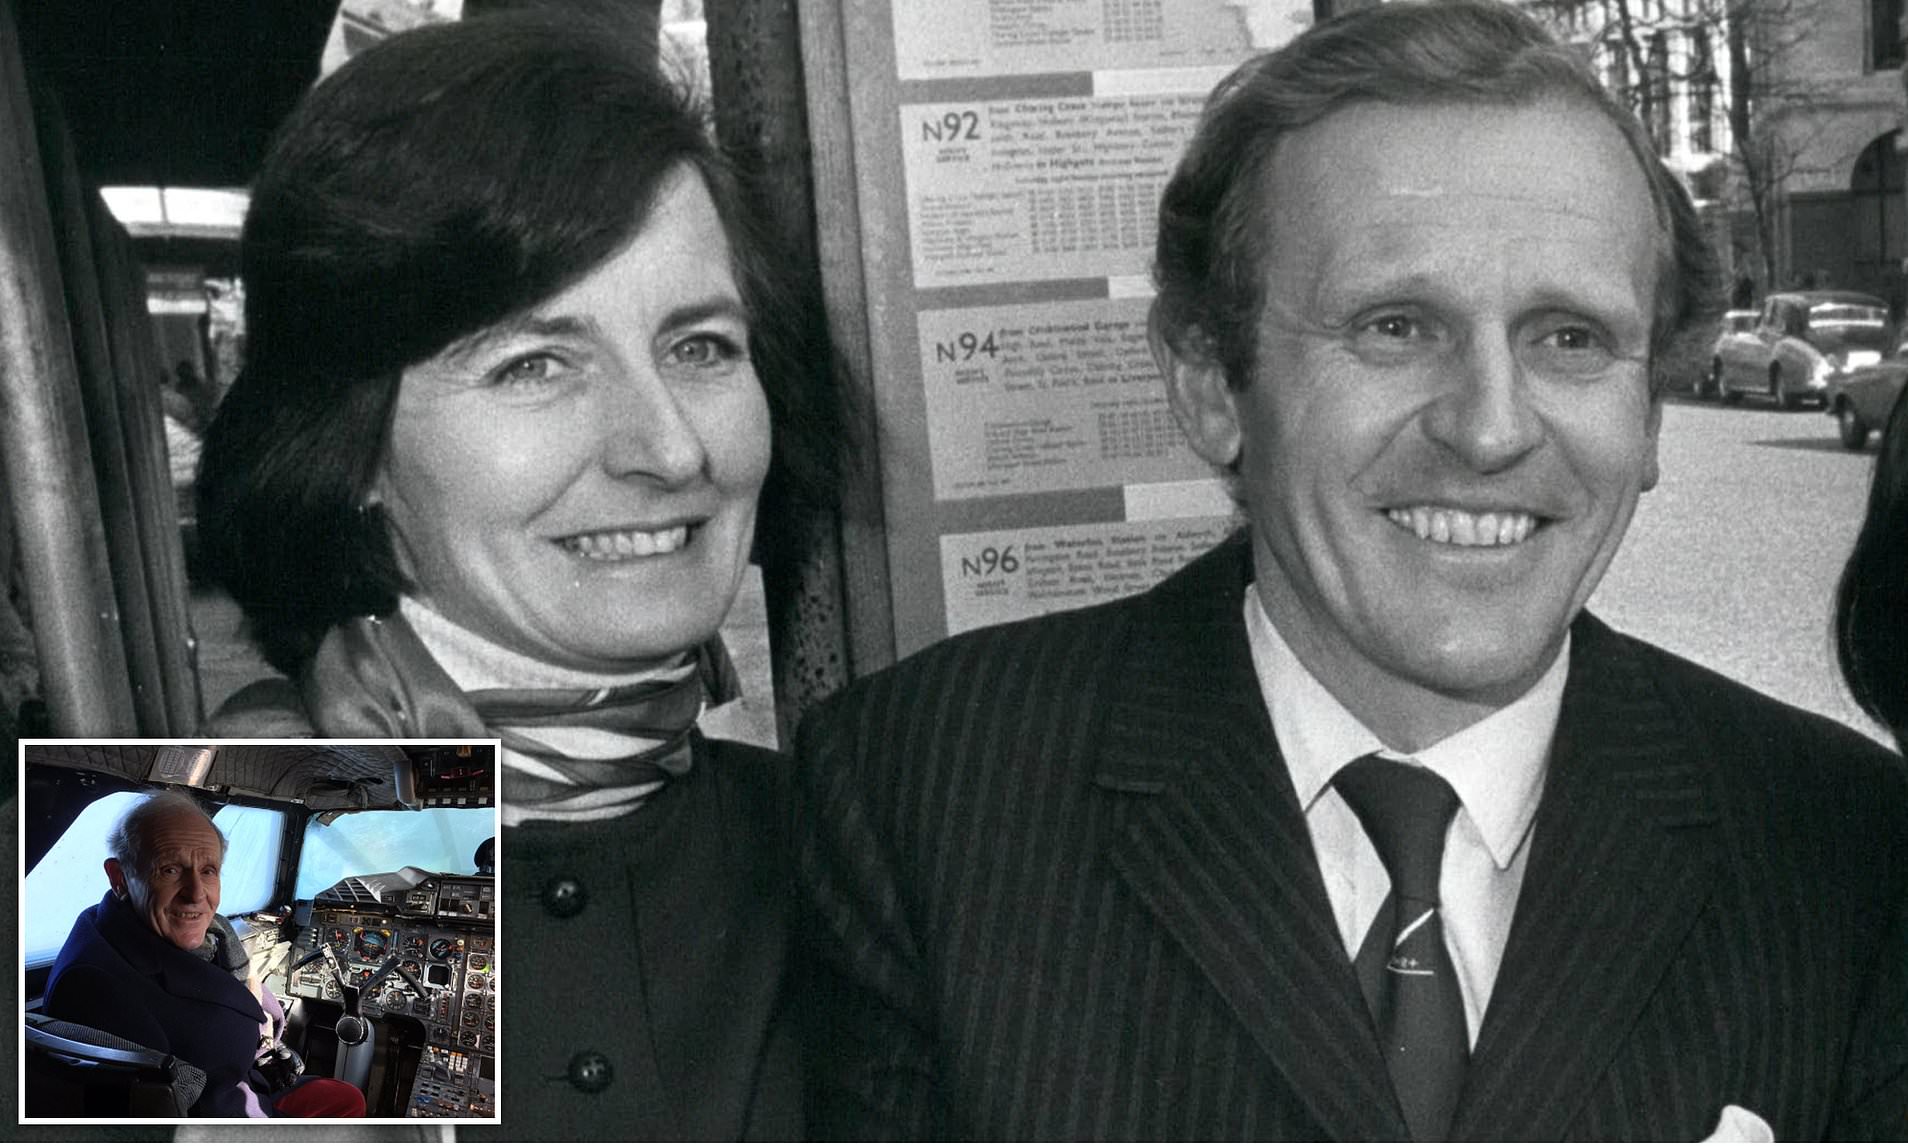 Queen's pilot and 'dementia-suffering' wife found dead in 'murder-suicide' at home